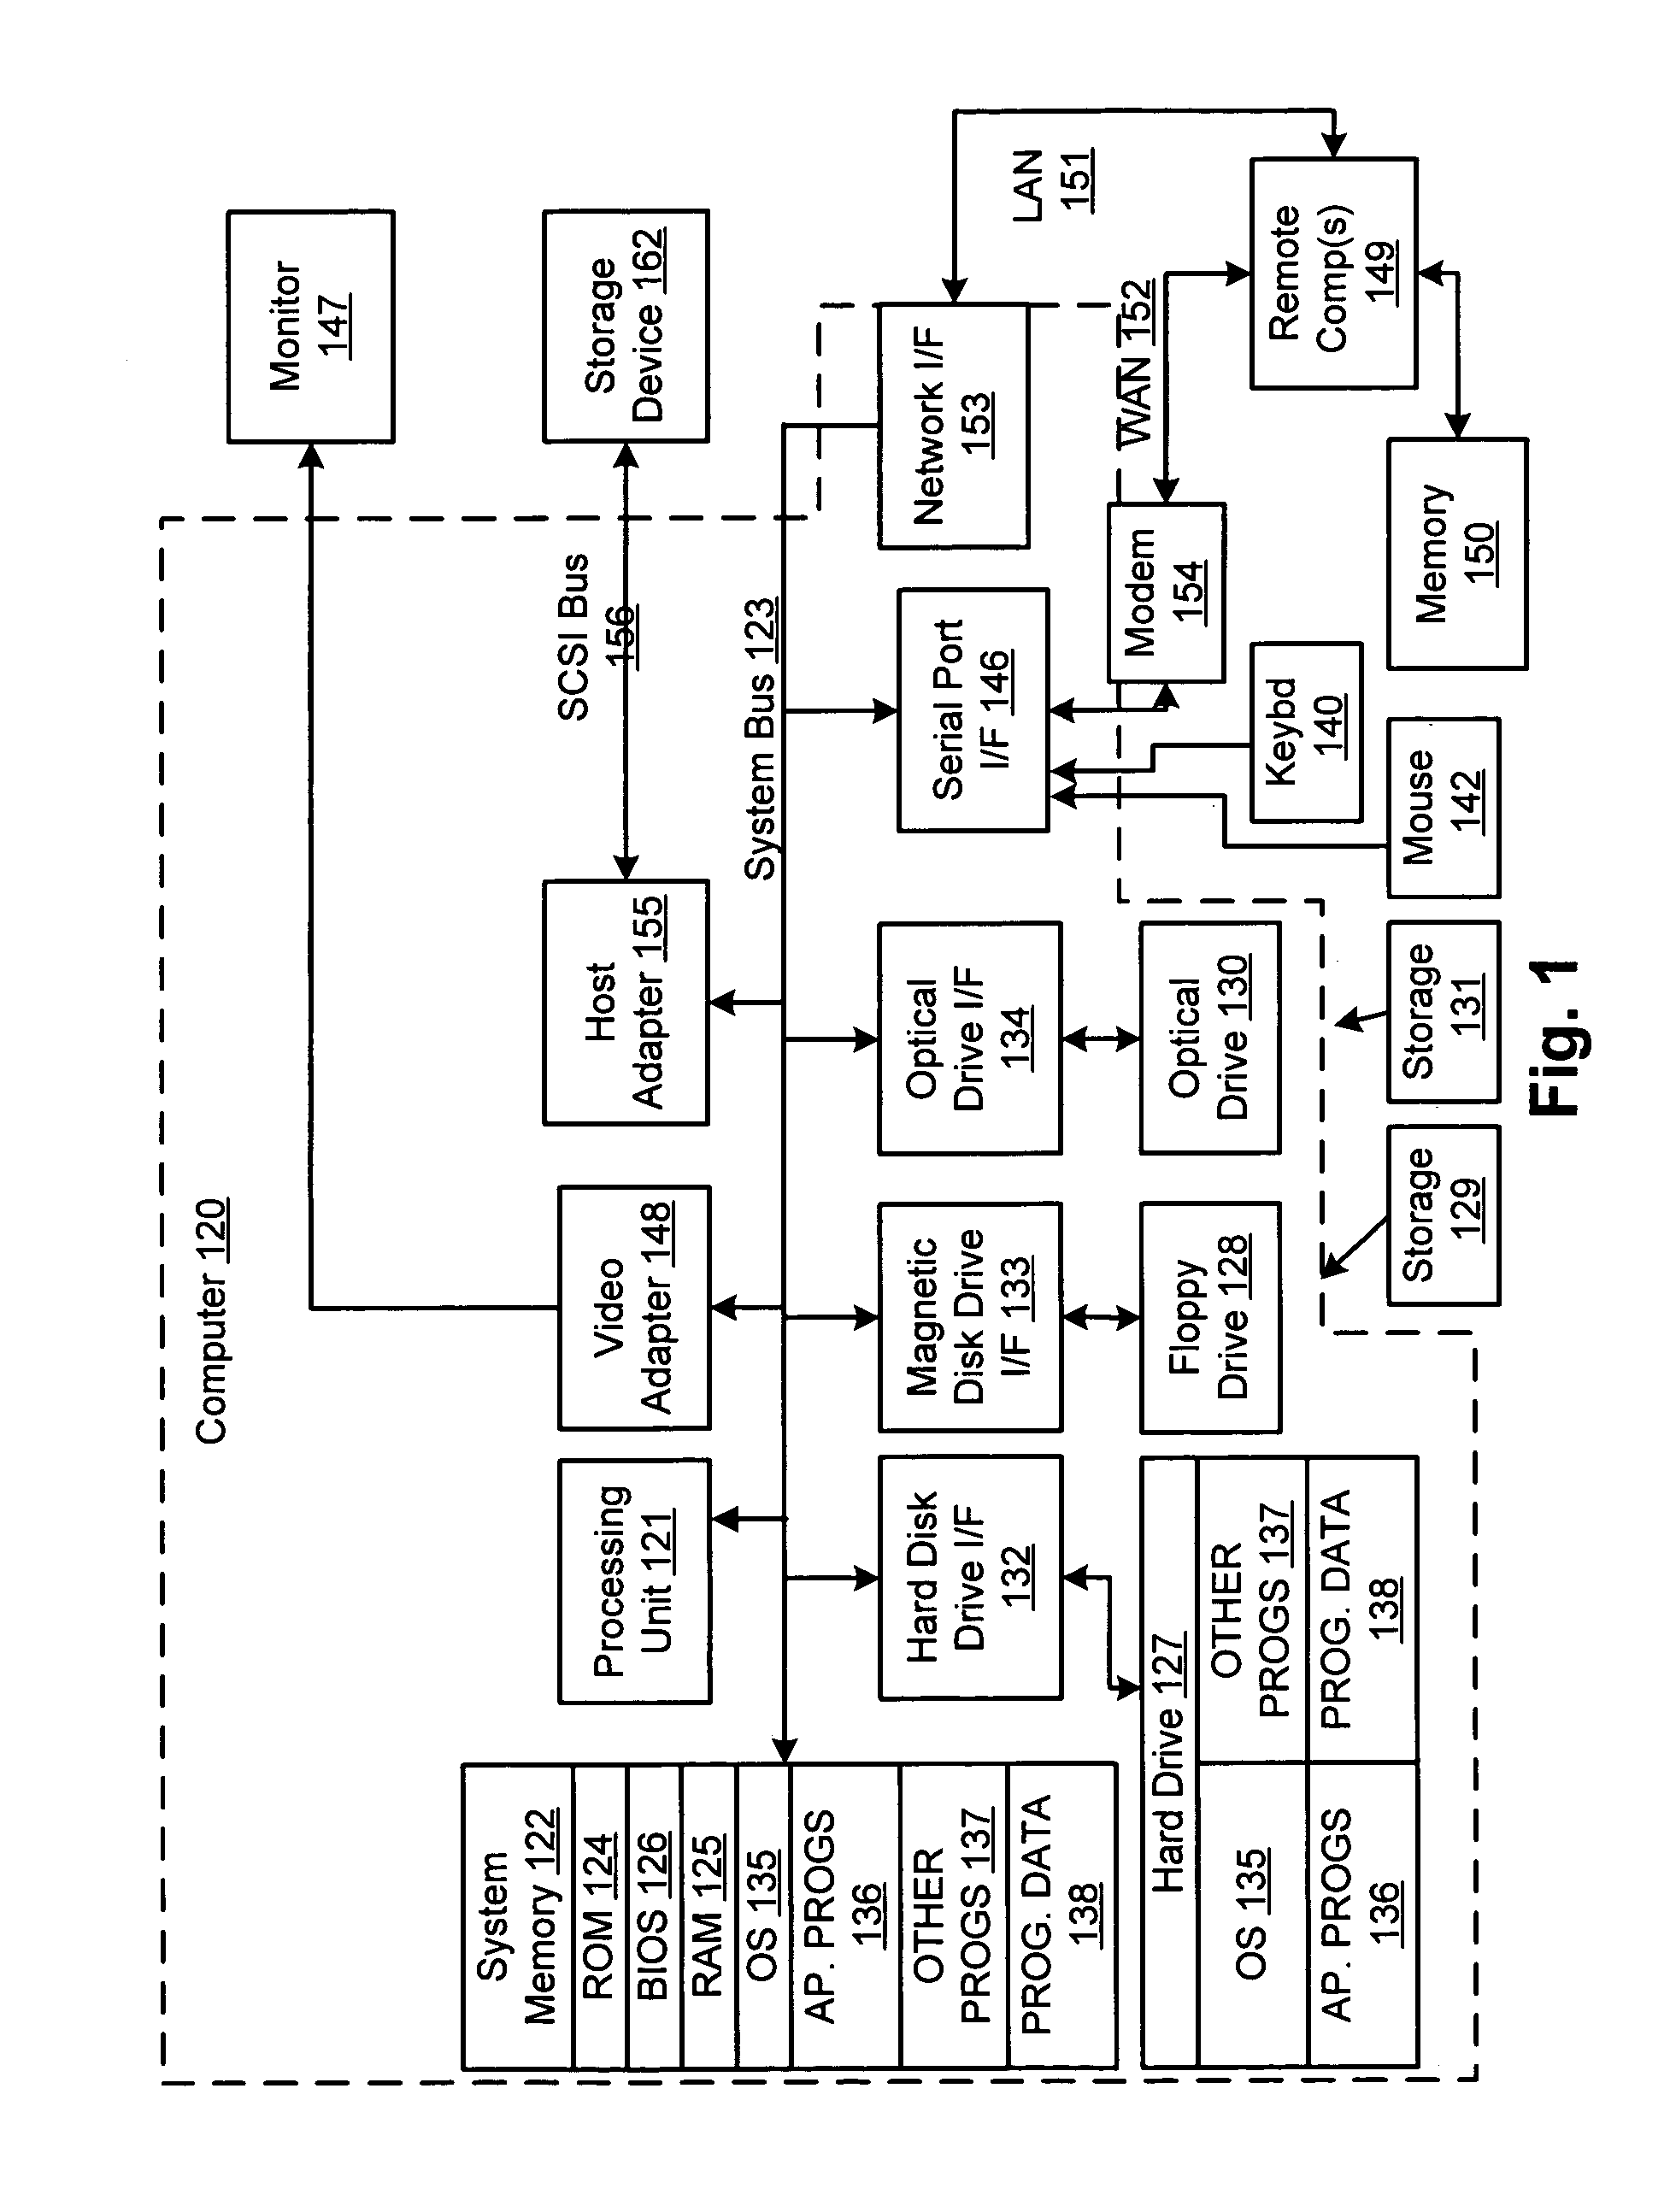 System and method for exposing a child list